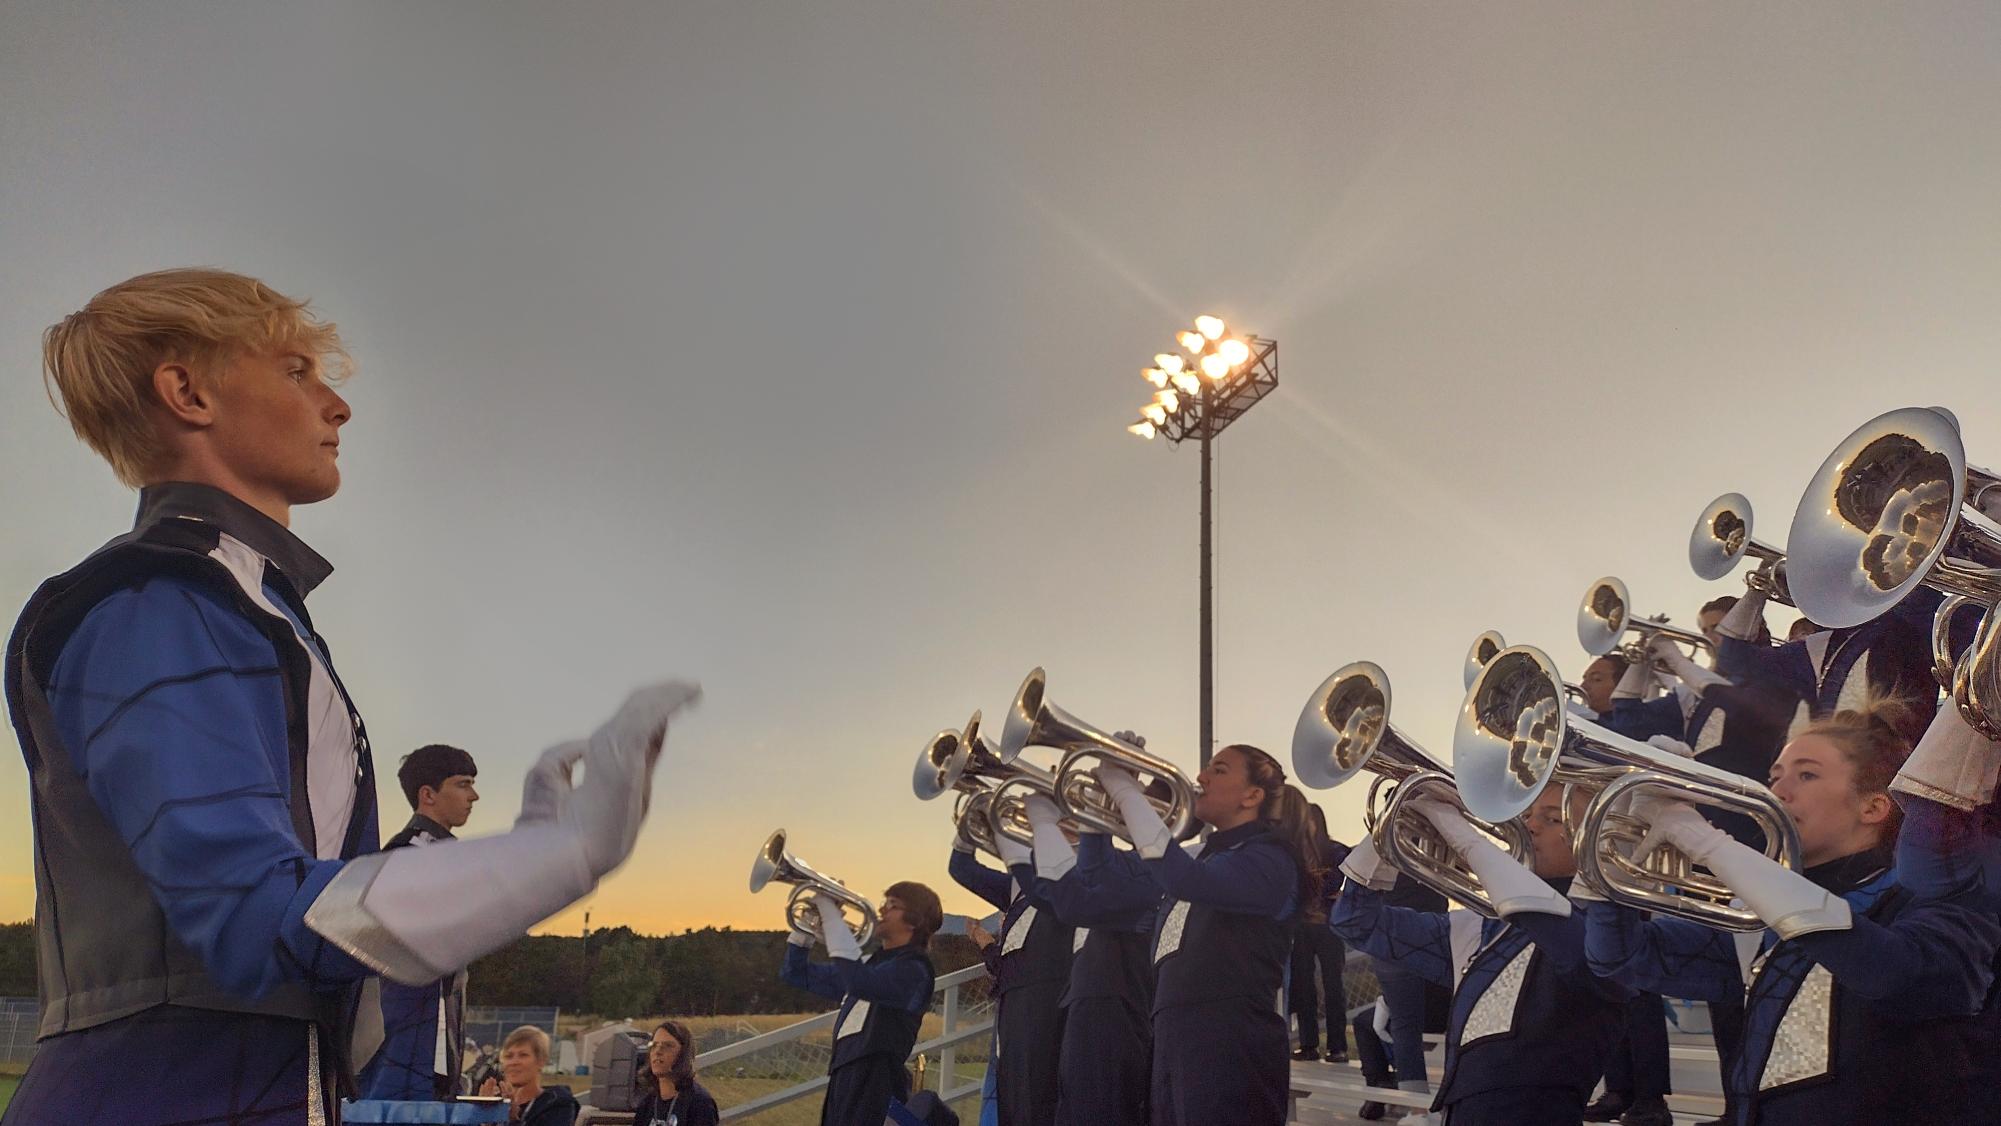 Junior, drum major, William Schuh directs the band at an Air Academy High School football game.